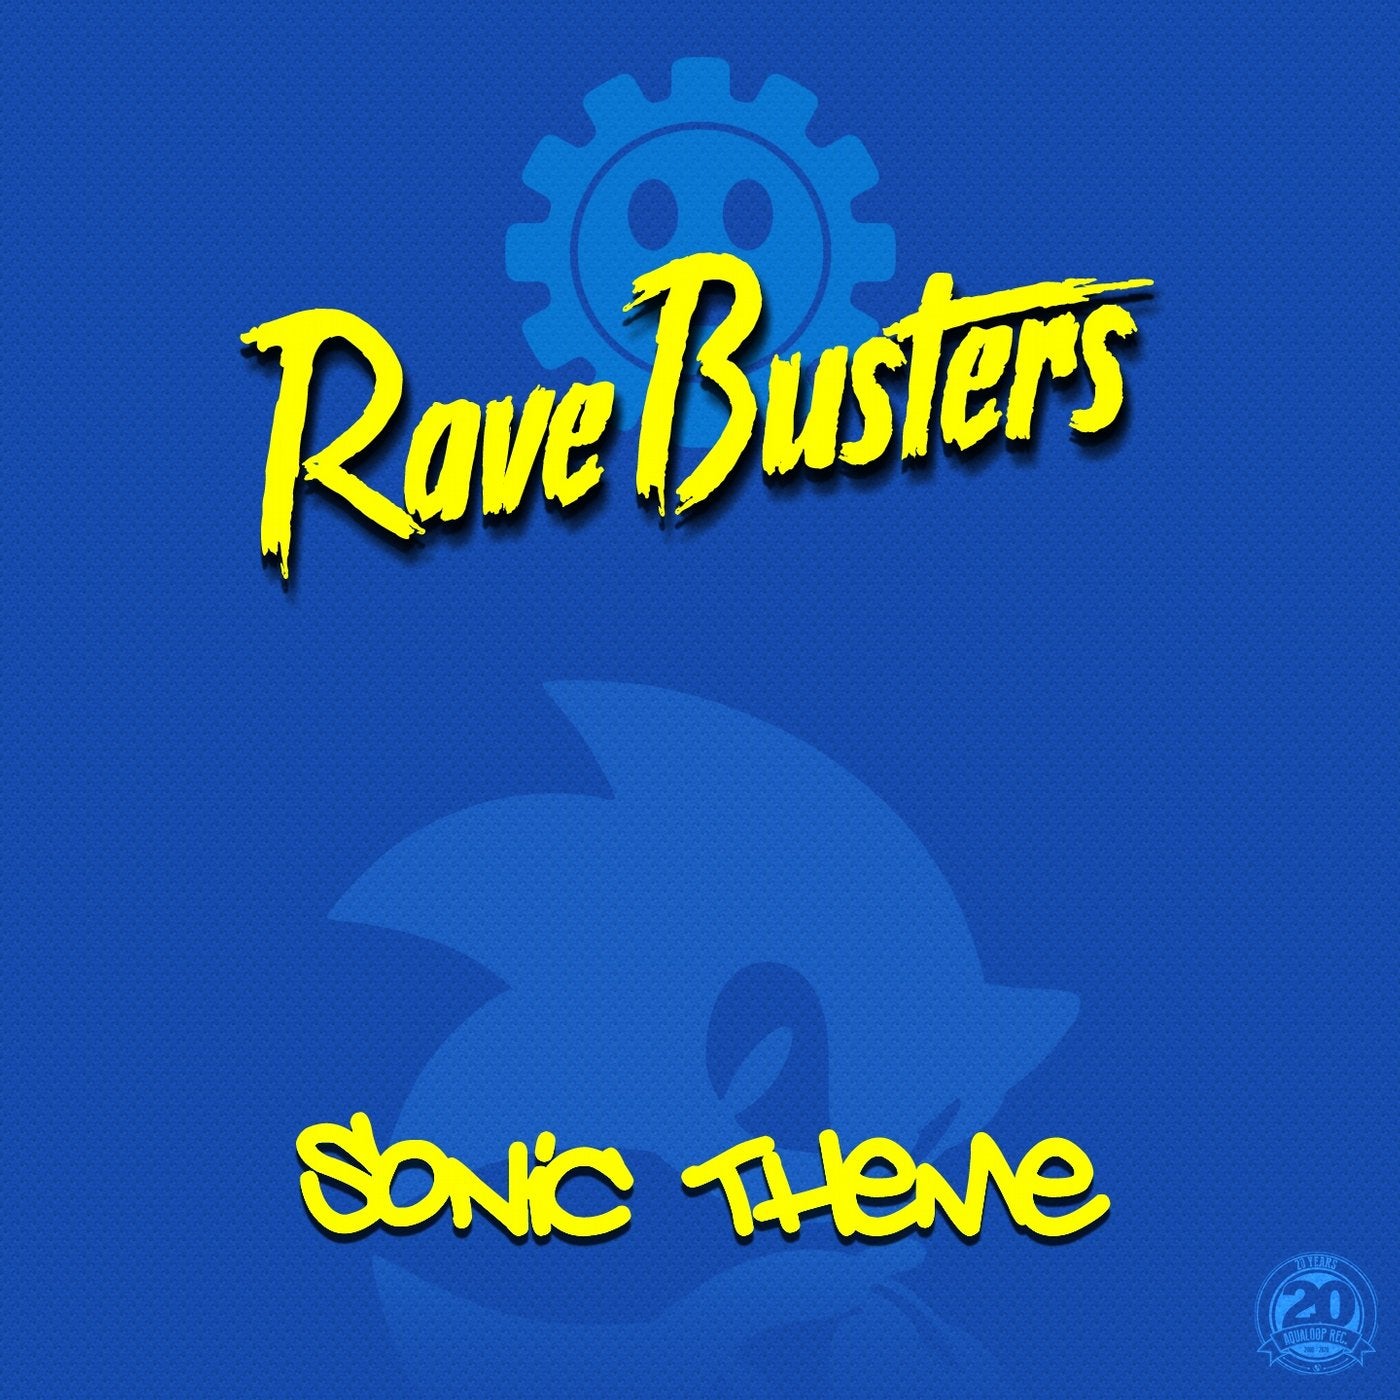 Rave by buster москва. Рейв бастерс. Rave by Buster. Бастер музыка.